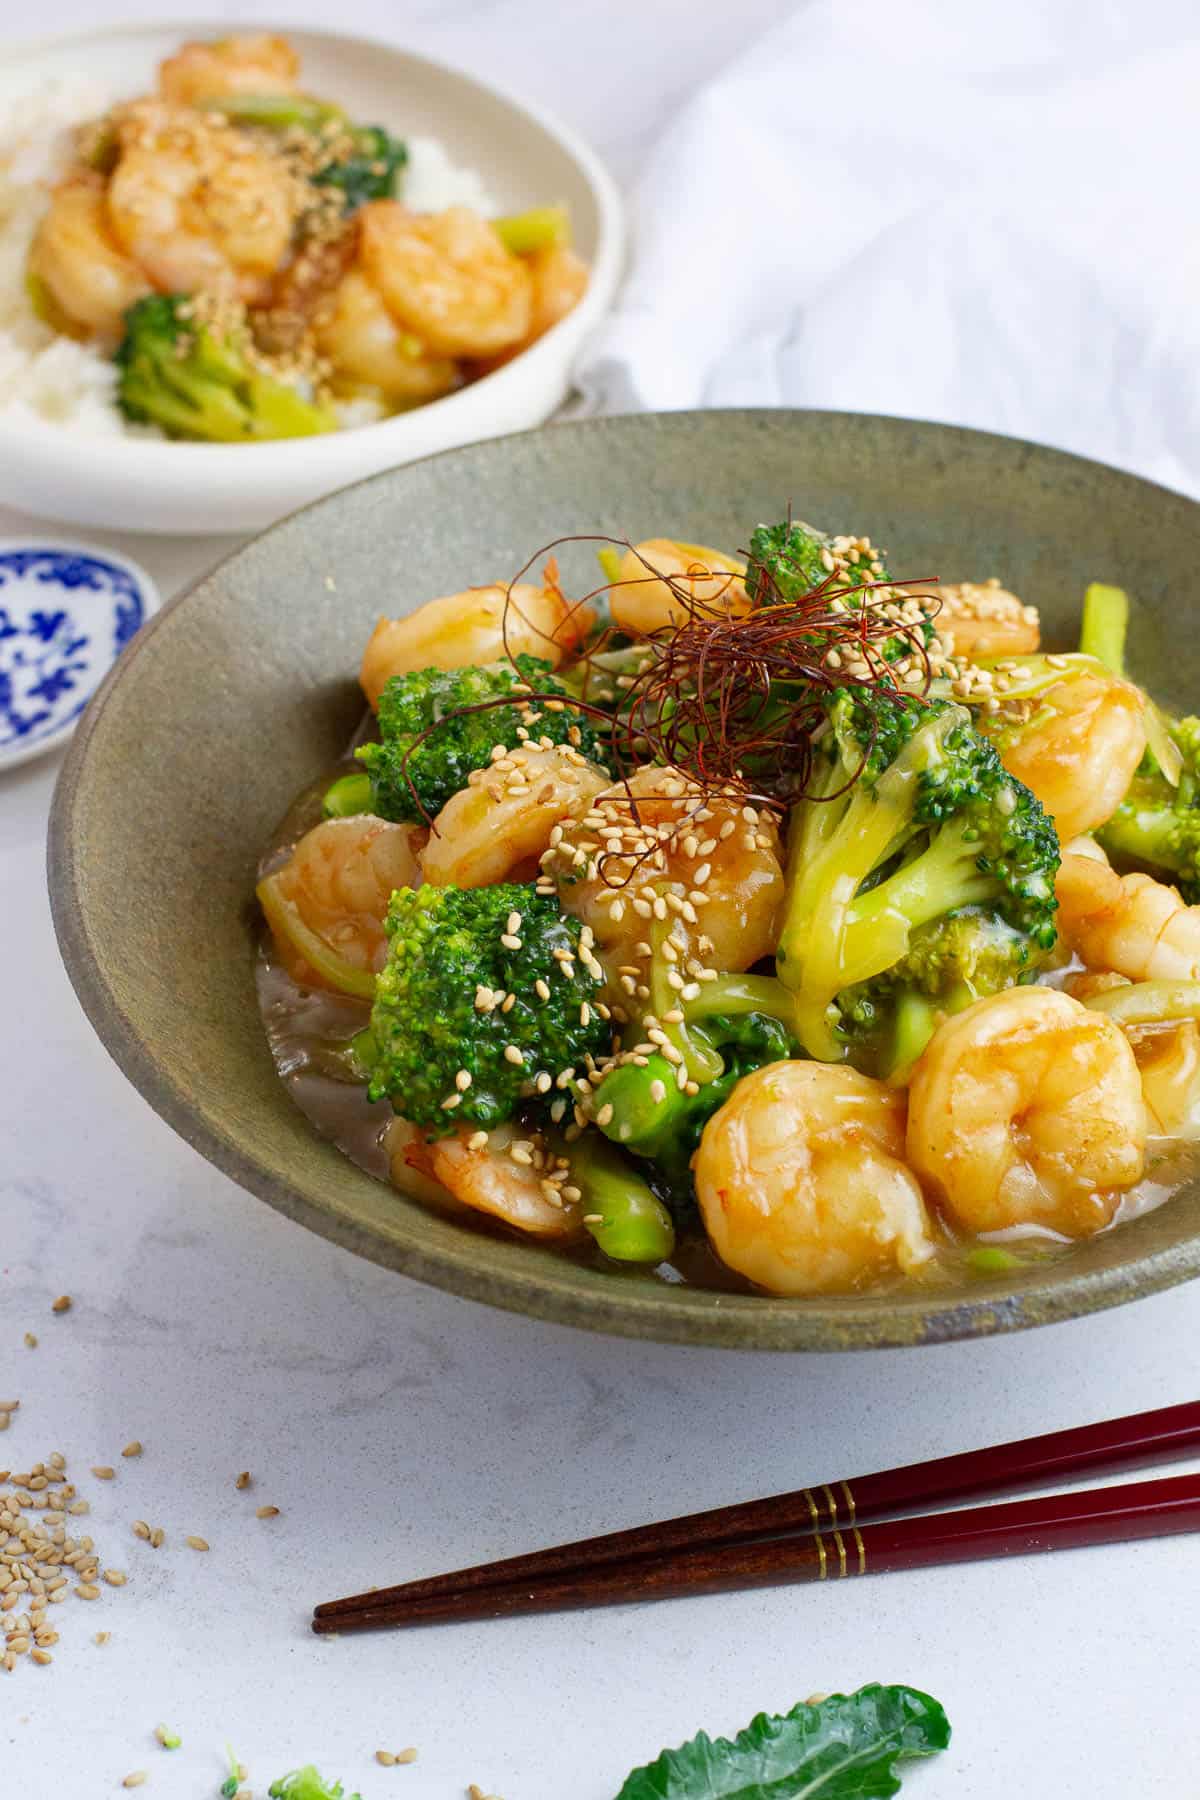 Shrimp and broccoli served in a bowl.